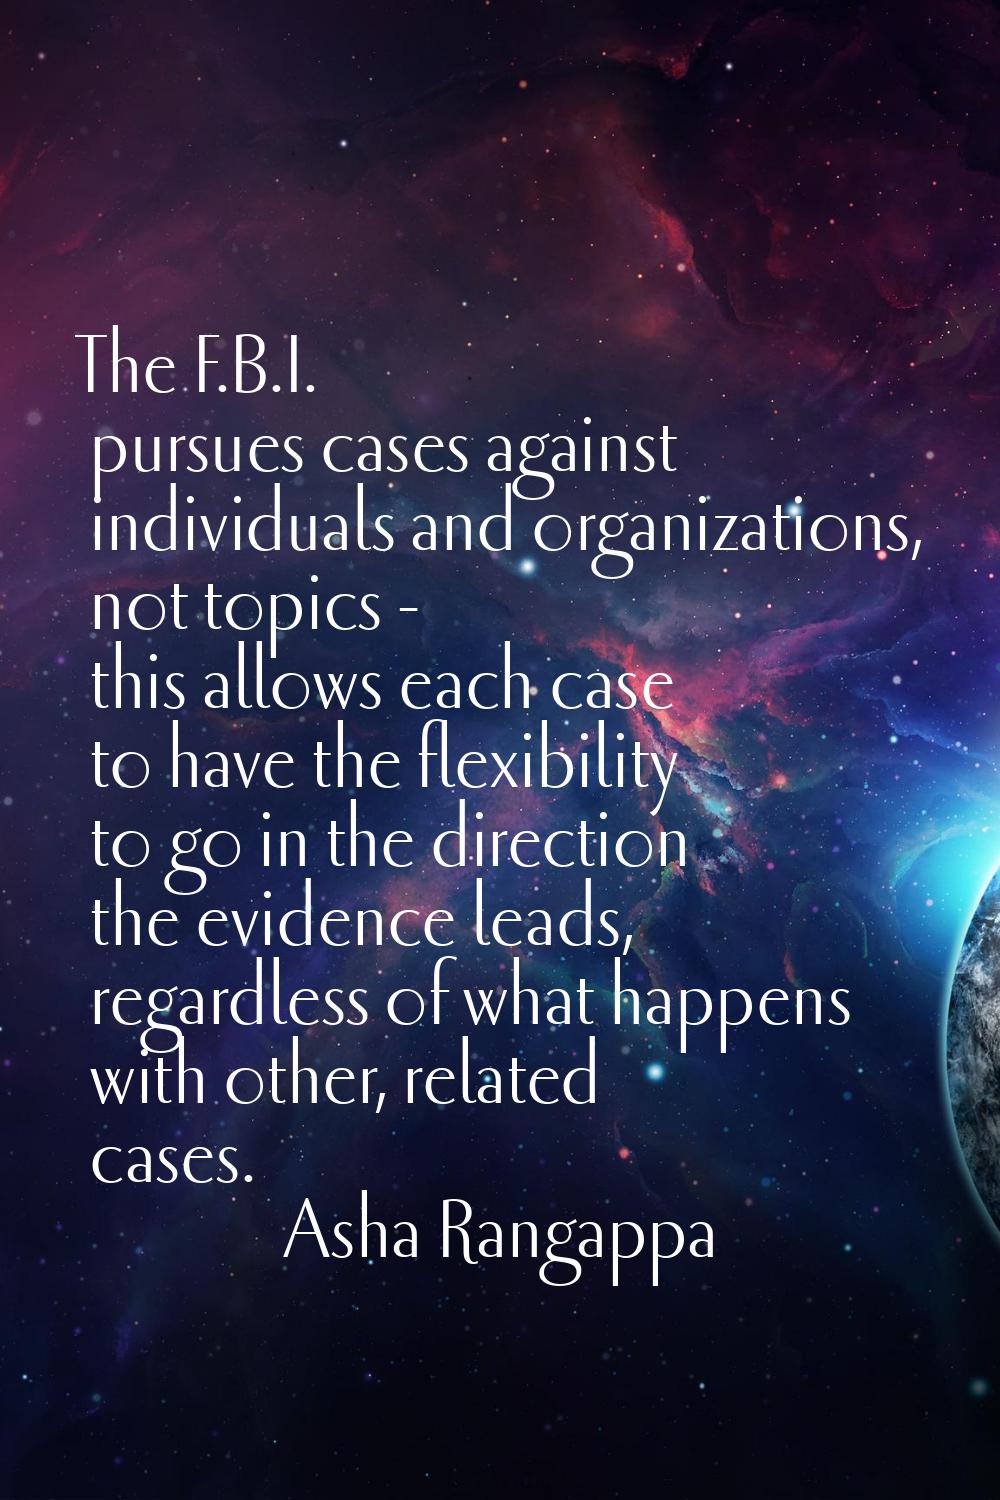 The F.B.I. pursues cases against individuals and organizations, not topics - this allows each case 